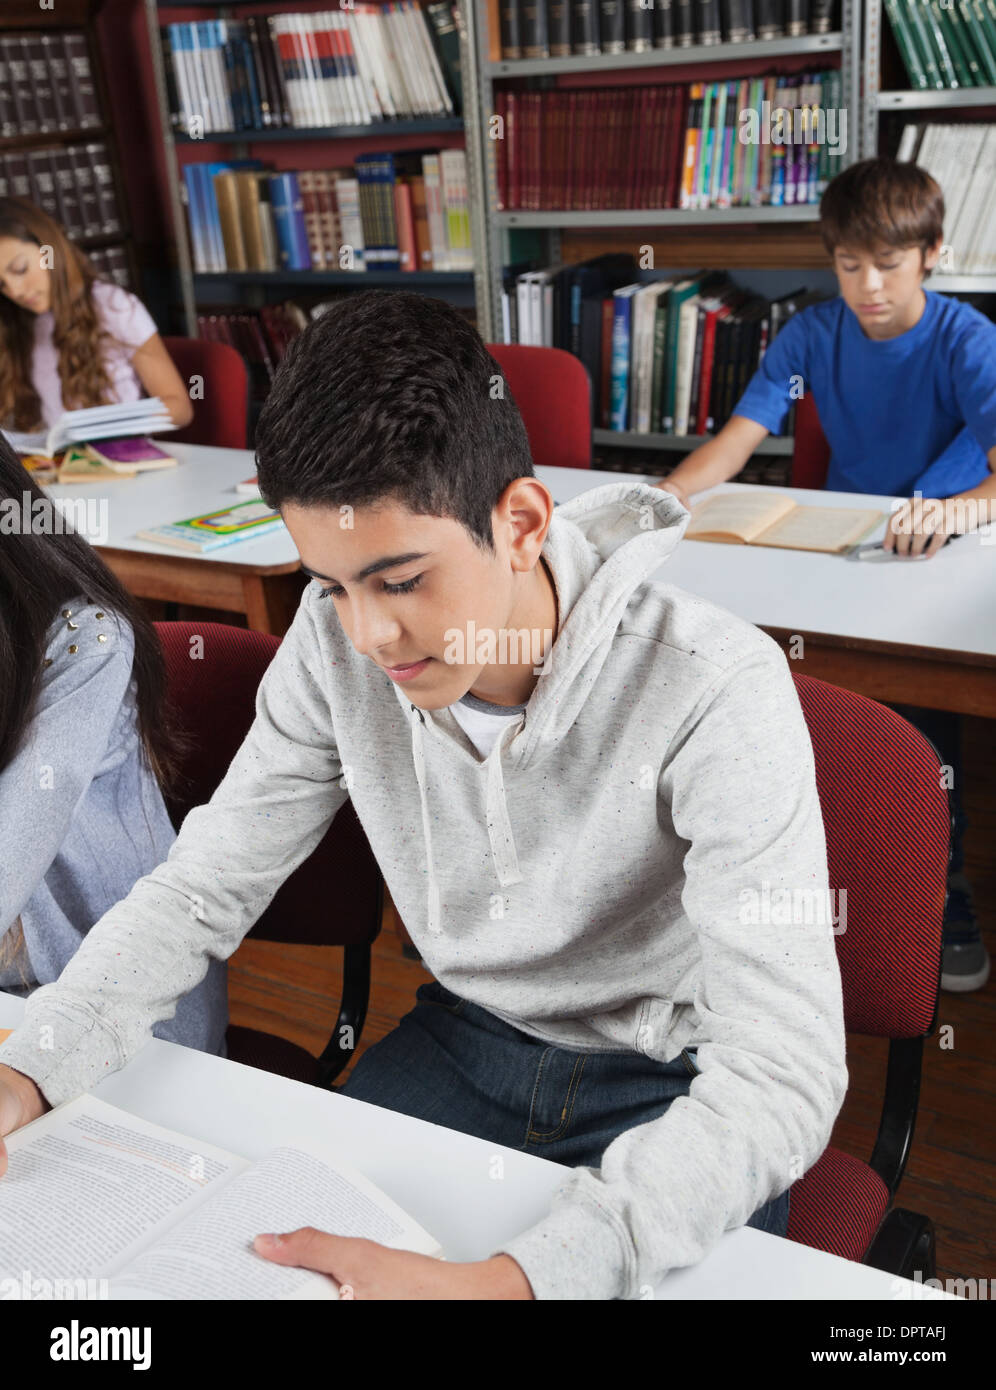 Male Student Reading Book In Library Stock Photo